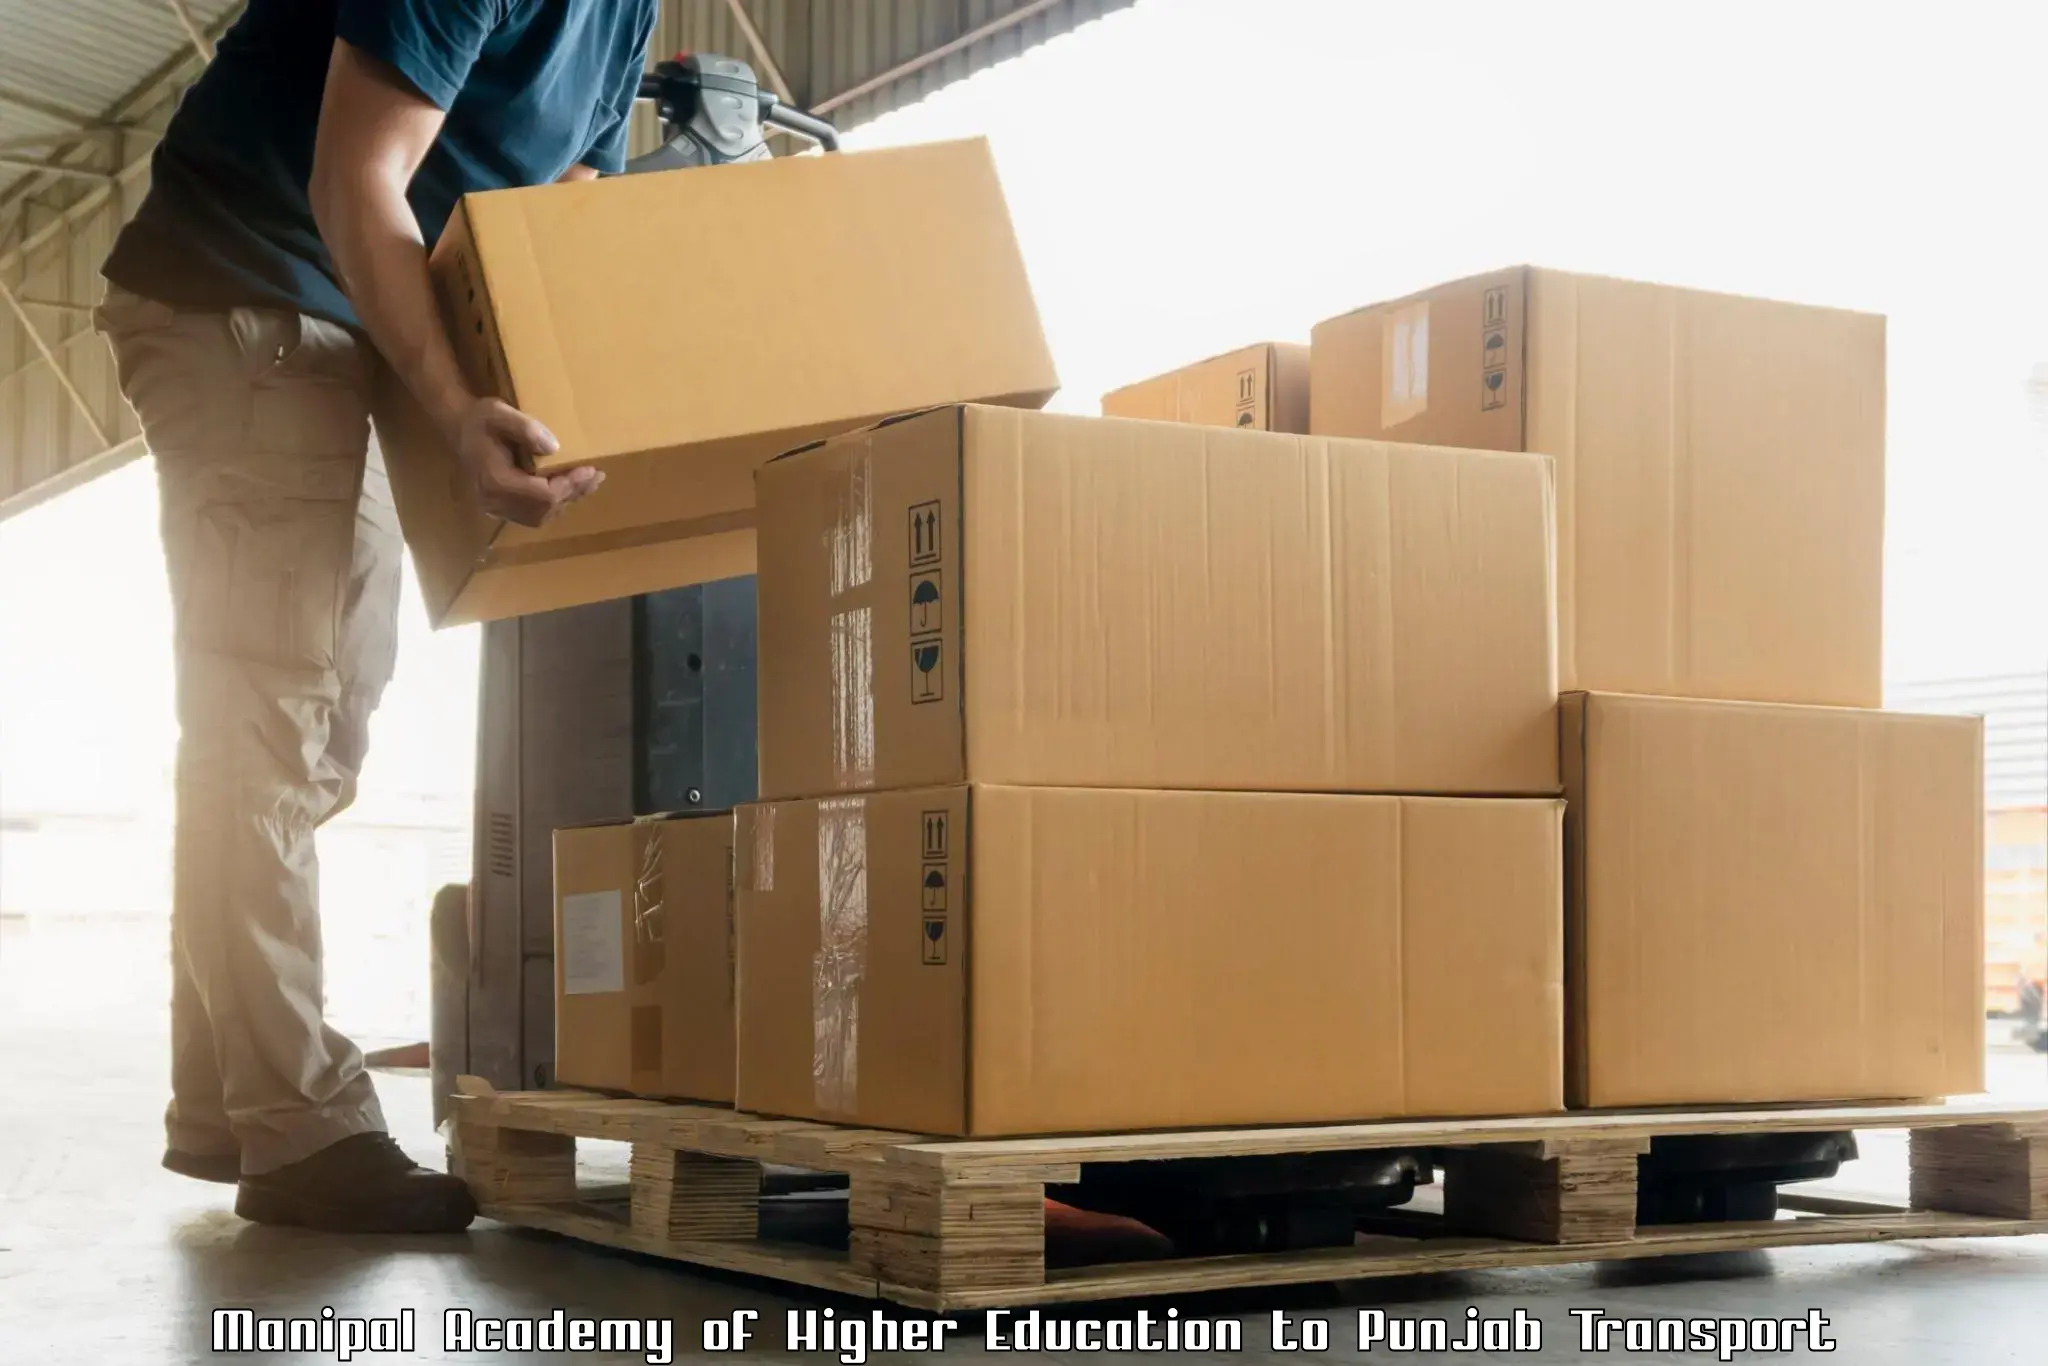 Parcel transport services Manipal Academy of Higher Education to Thapar Institute of Engineering and Technology Patiala